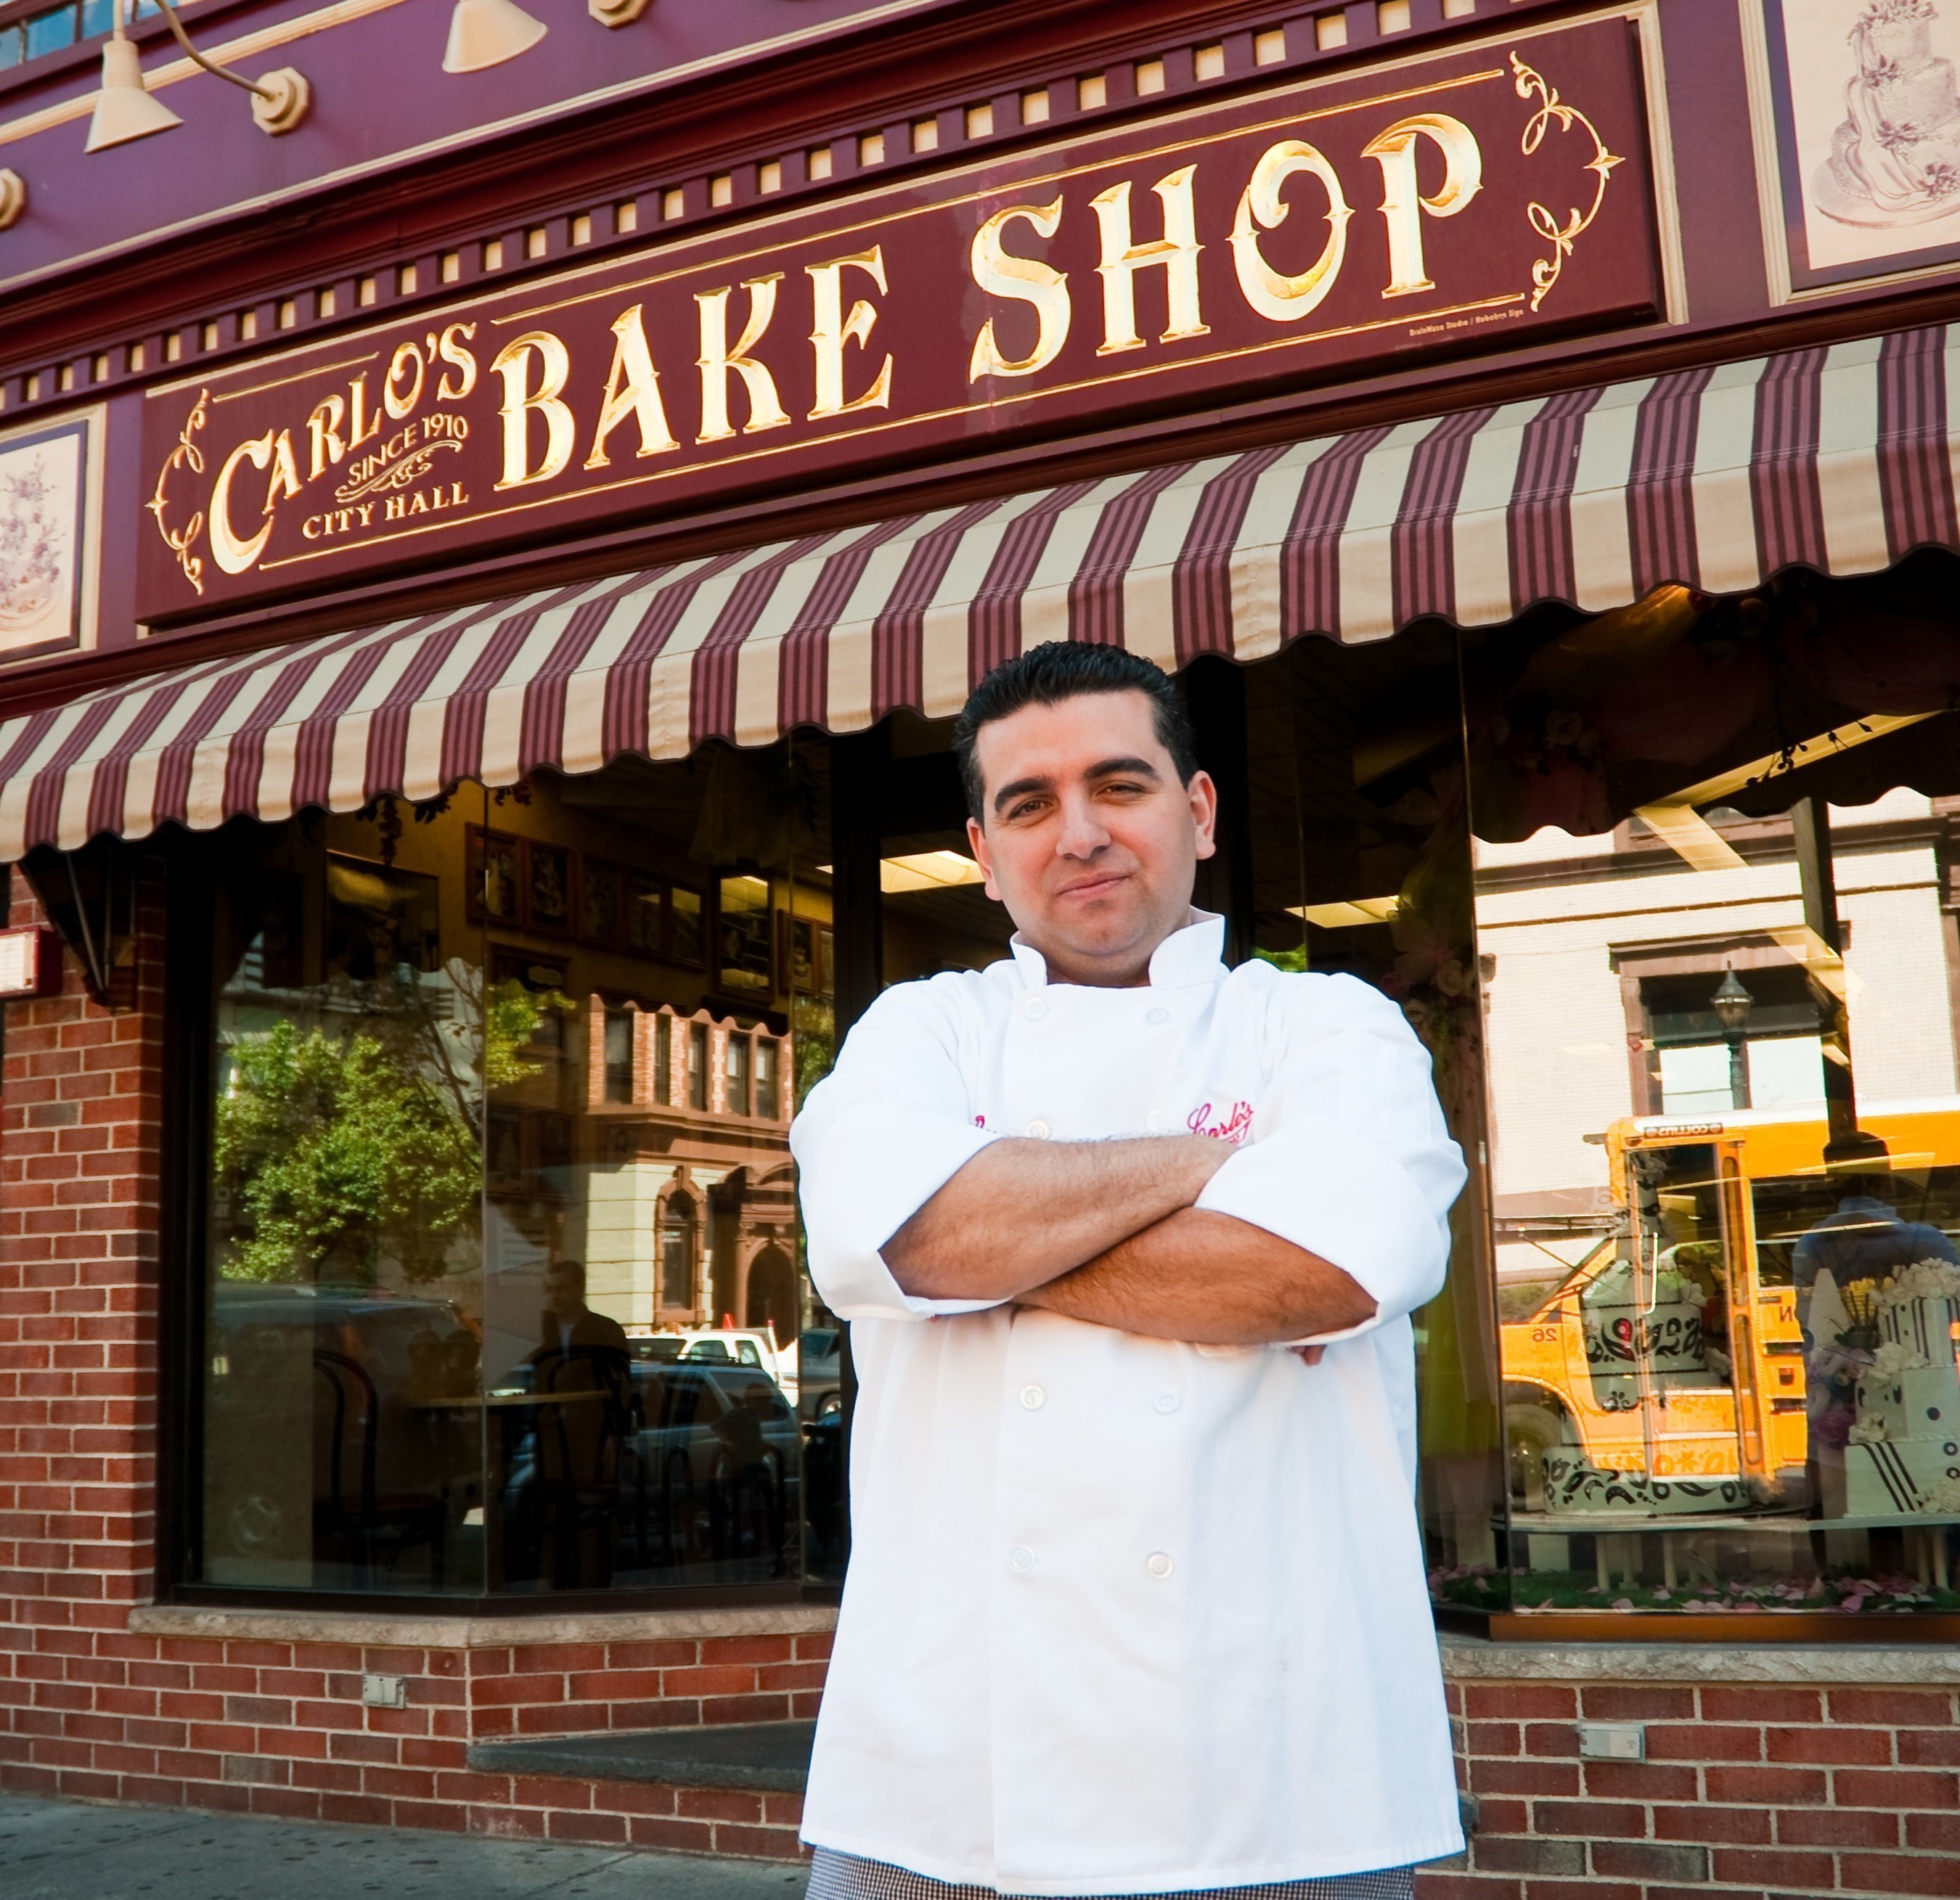 Cake Boss Buddy Valastro outside the flagship Carlo's Bakery location in Hoboken, NJ. The Carlo's Bakery at Preston Center in Dallas, Texas will be the successful family-owned business's thirteenth location. Other locations include Hoboken, Marlton, Morristown, Red Bank, Ridgewood, and Westfield, NJ; Las Vegas, NV; Uncasville, CT at Mohegan Sun; New York, and Westbury, NY; and, on Norwegian Cruise Lines.